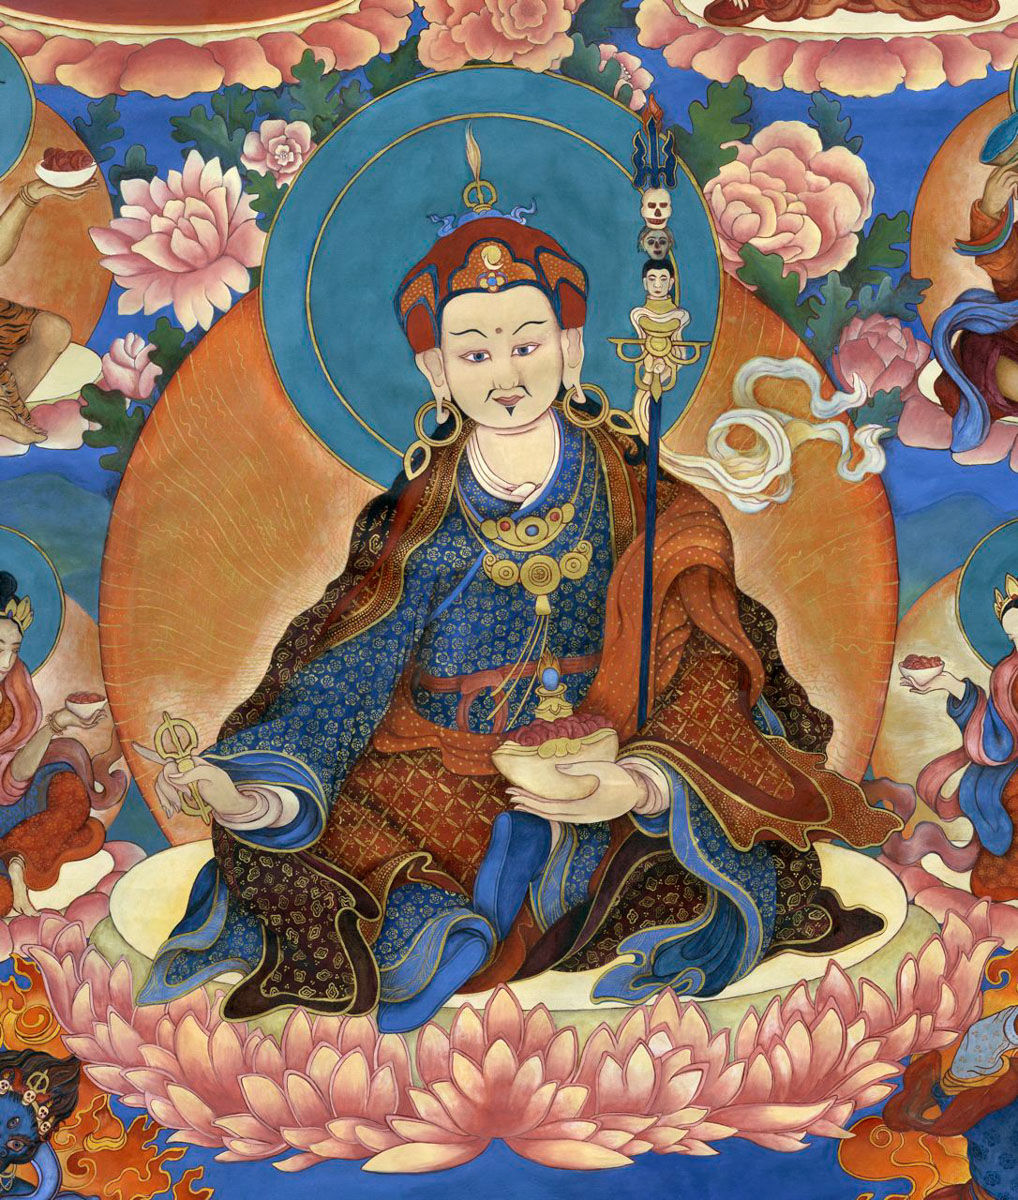 Padmasambhava is also called Guru Rimpoche, the founder of the Nyingmapa School of Tibetan Buddhism. All through his life he was a controversial figure. On at least two occasions his flouting of convention caused such outrage that people attempted to burn him at the stake – but he emerged unscathed each time. He is the archetype of the embodiment in one person all the accumulated knowledge, wisdom, love and power of the Buddhist tradition. He brought Buddhism to Tibet from India in the eighth century.